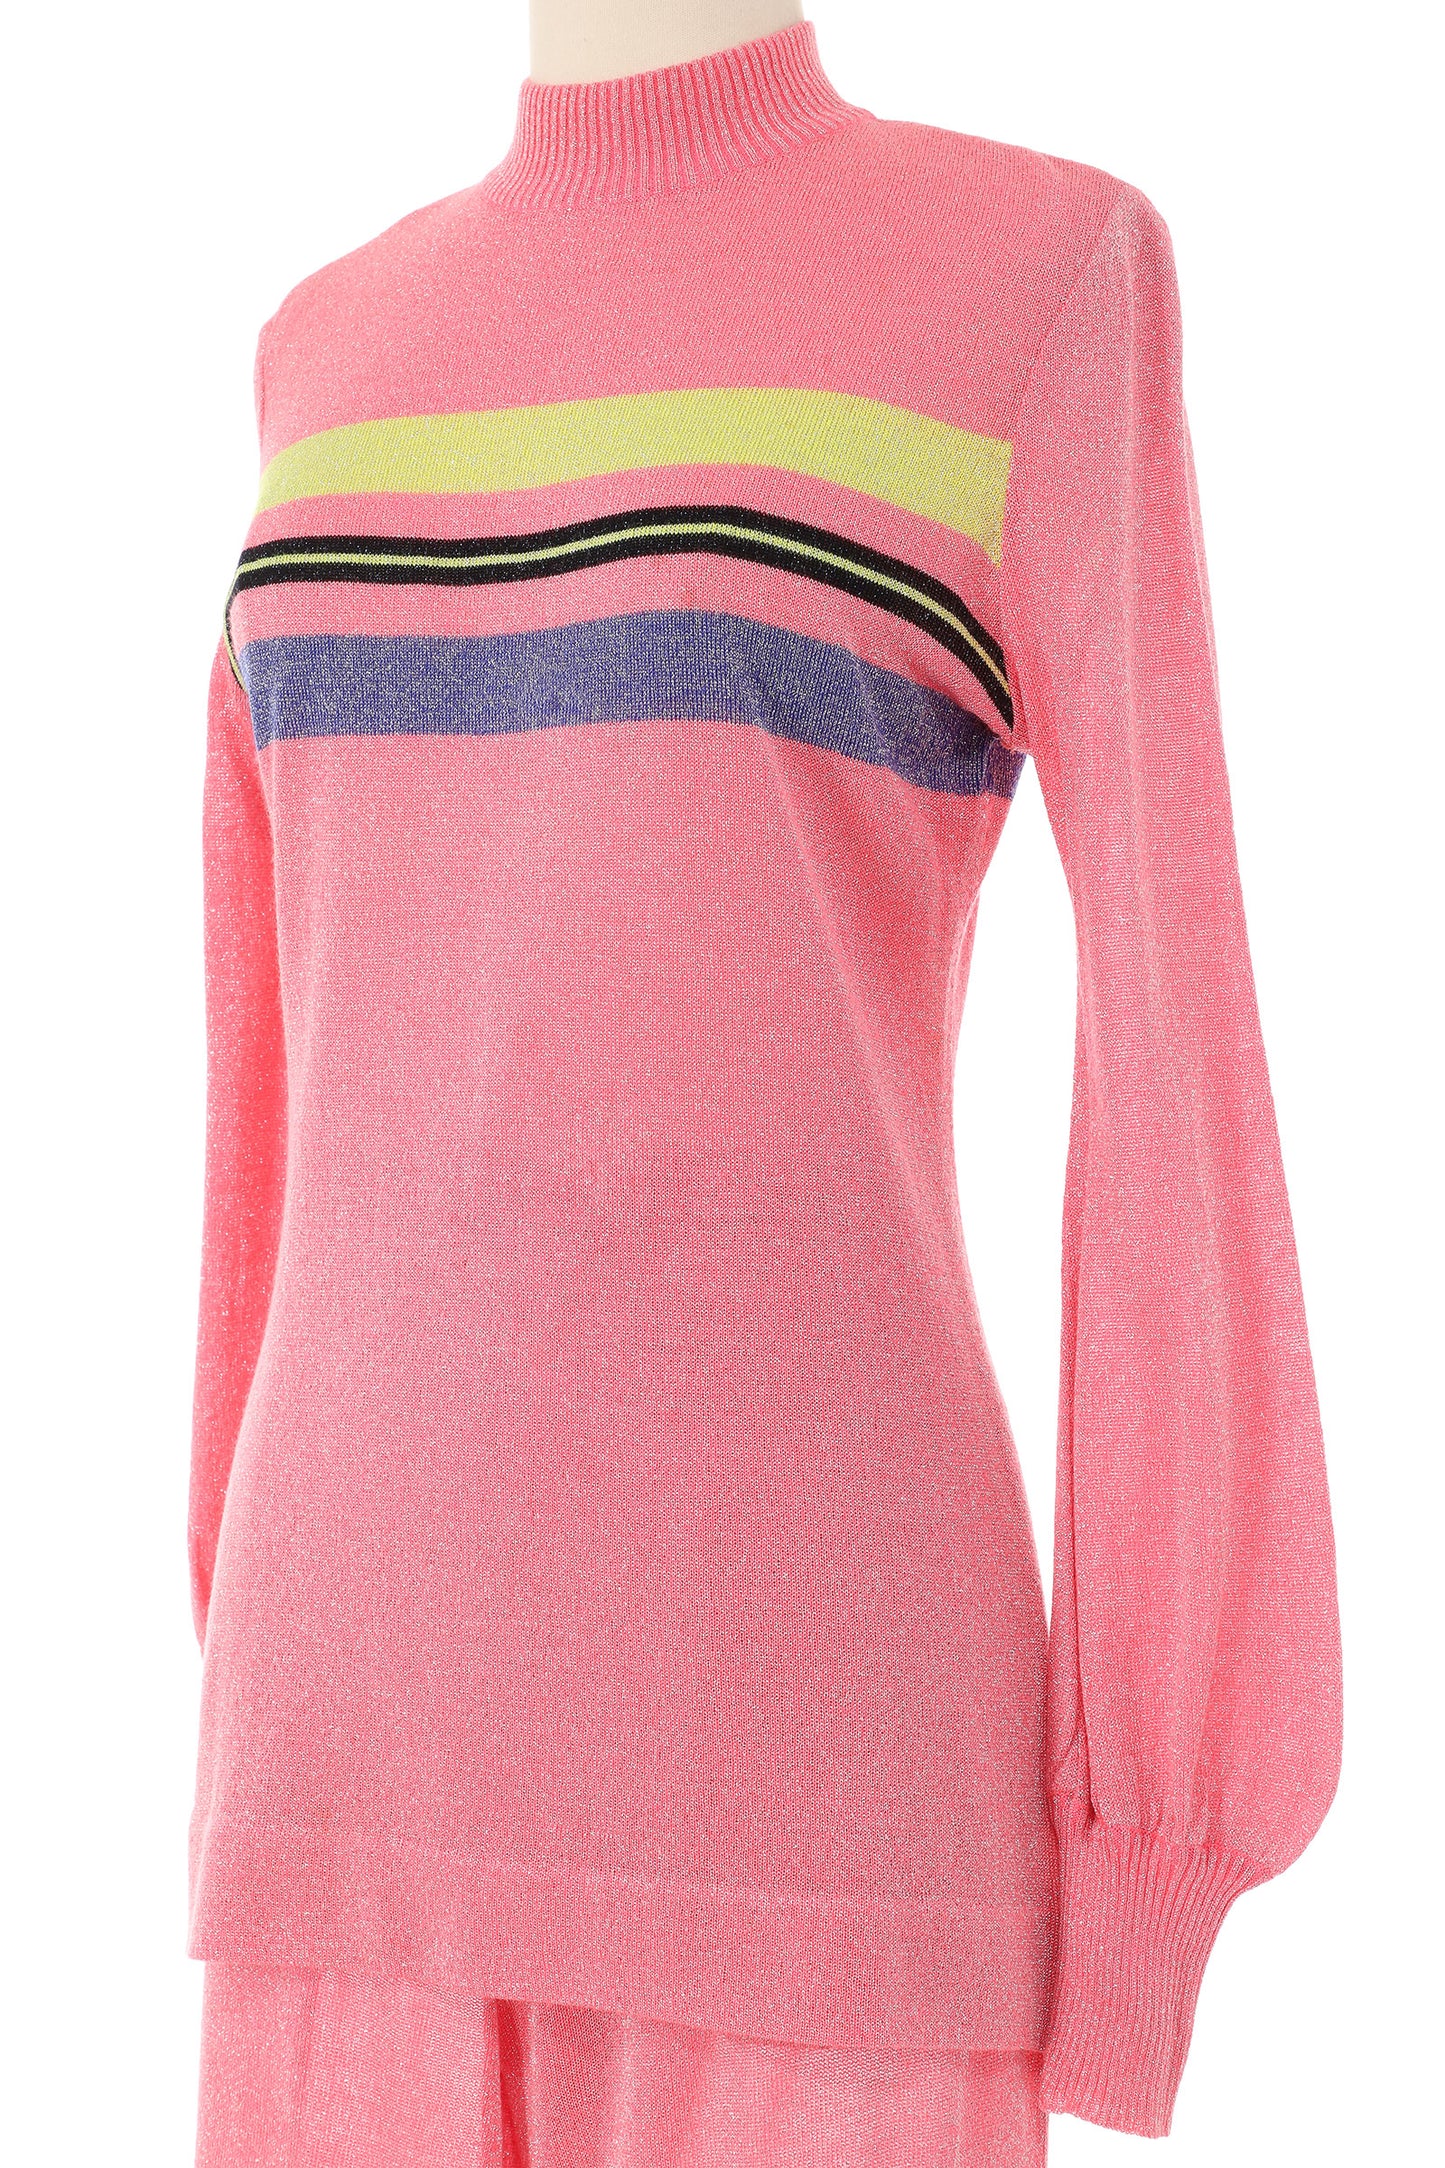 Emilio Pucci 1970s Pink Sparkle Knit Trousers and Sweater Set